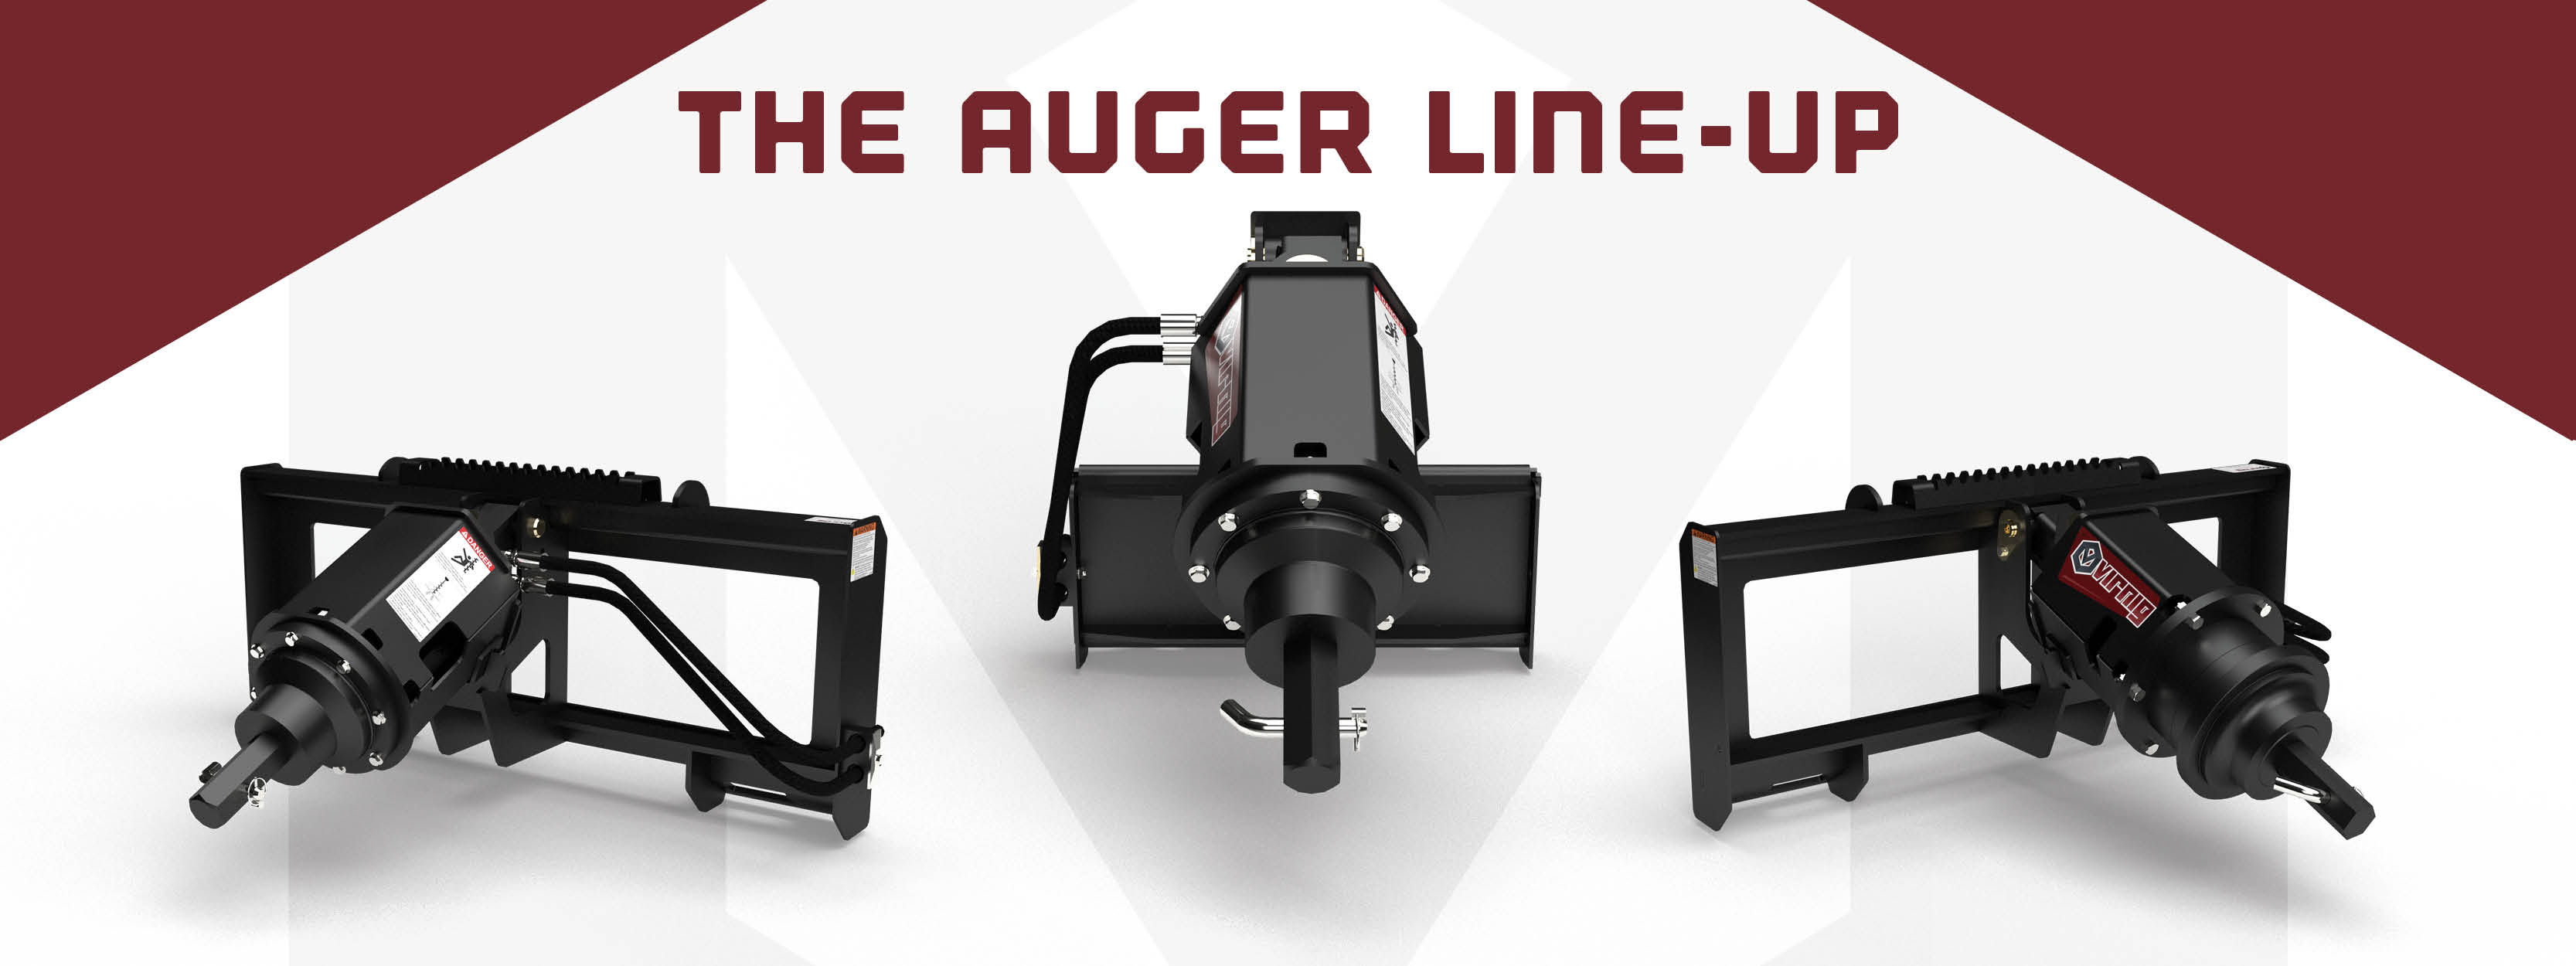 Auger Launch - Email Banner